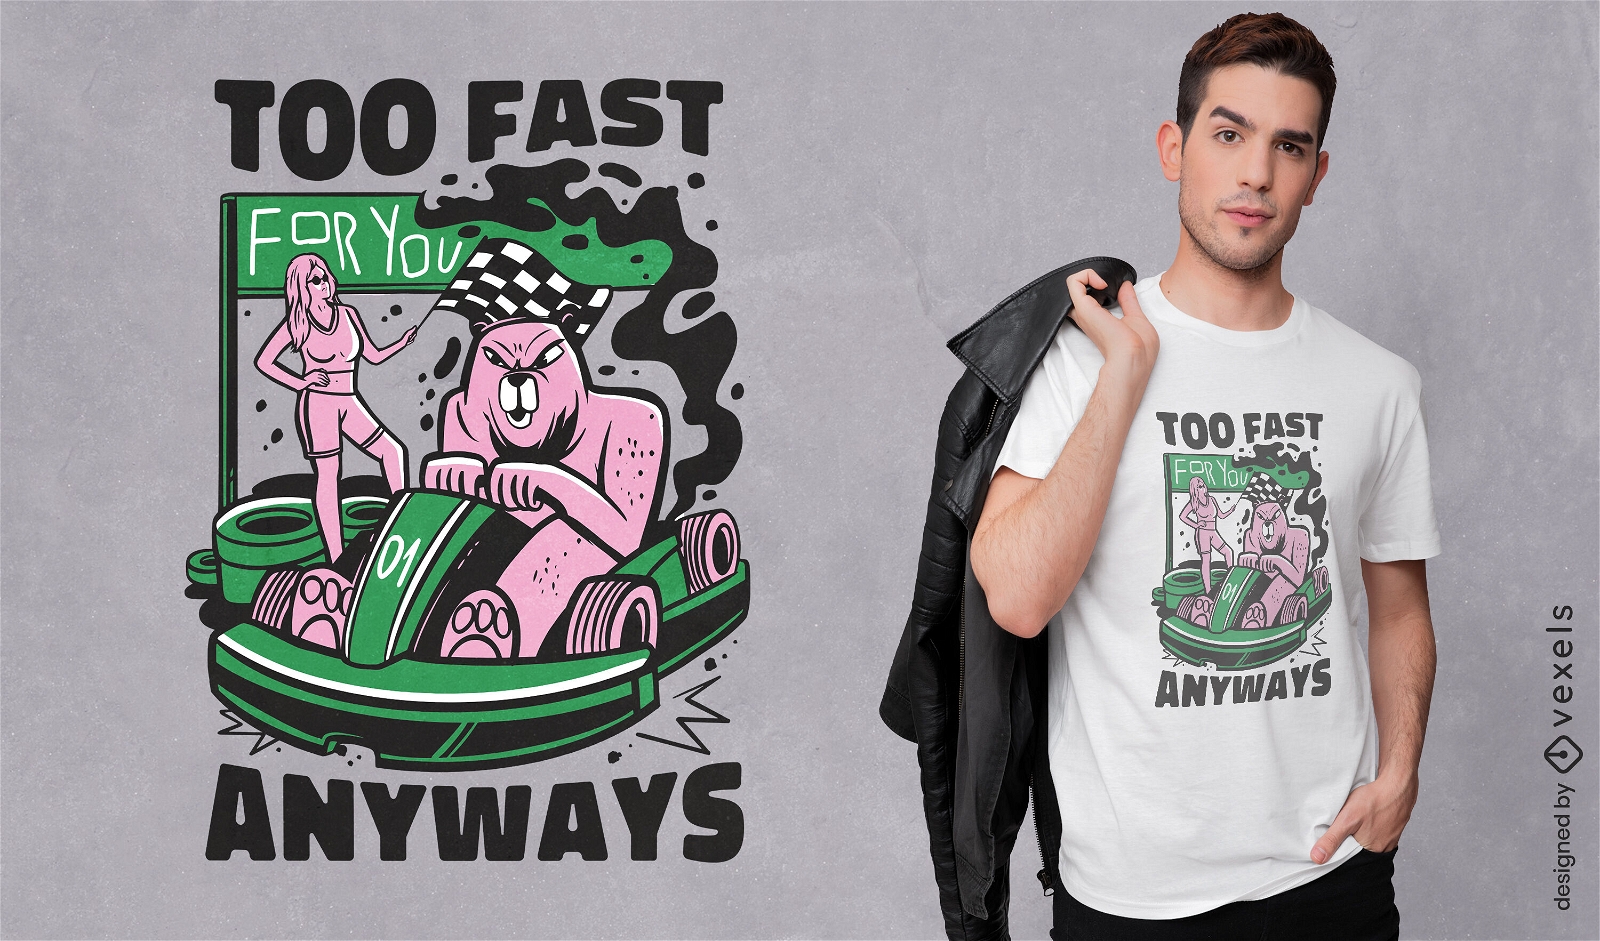 Too fast Go-kart quote t-shirt design